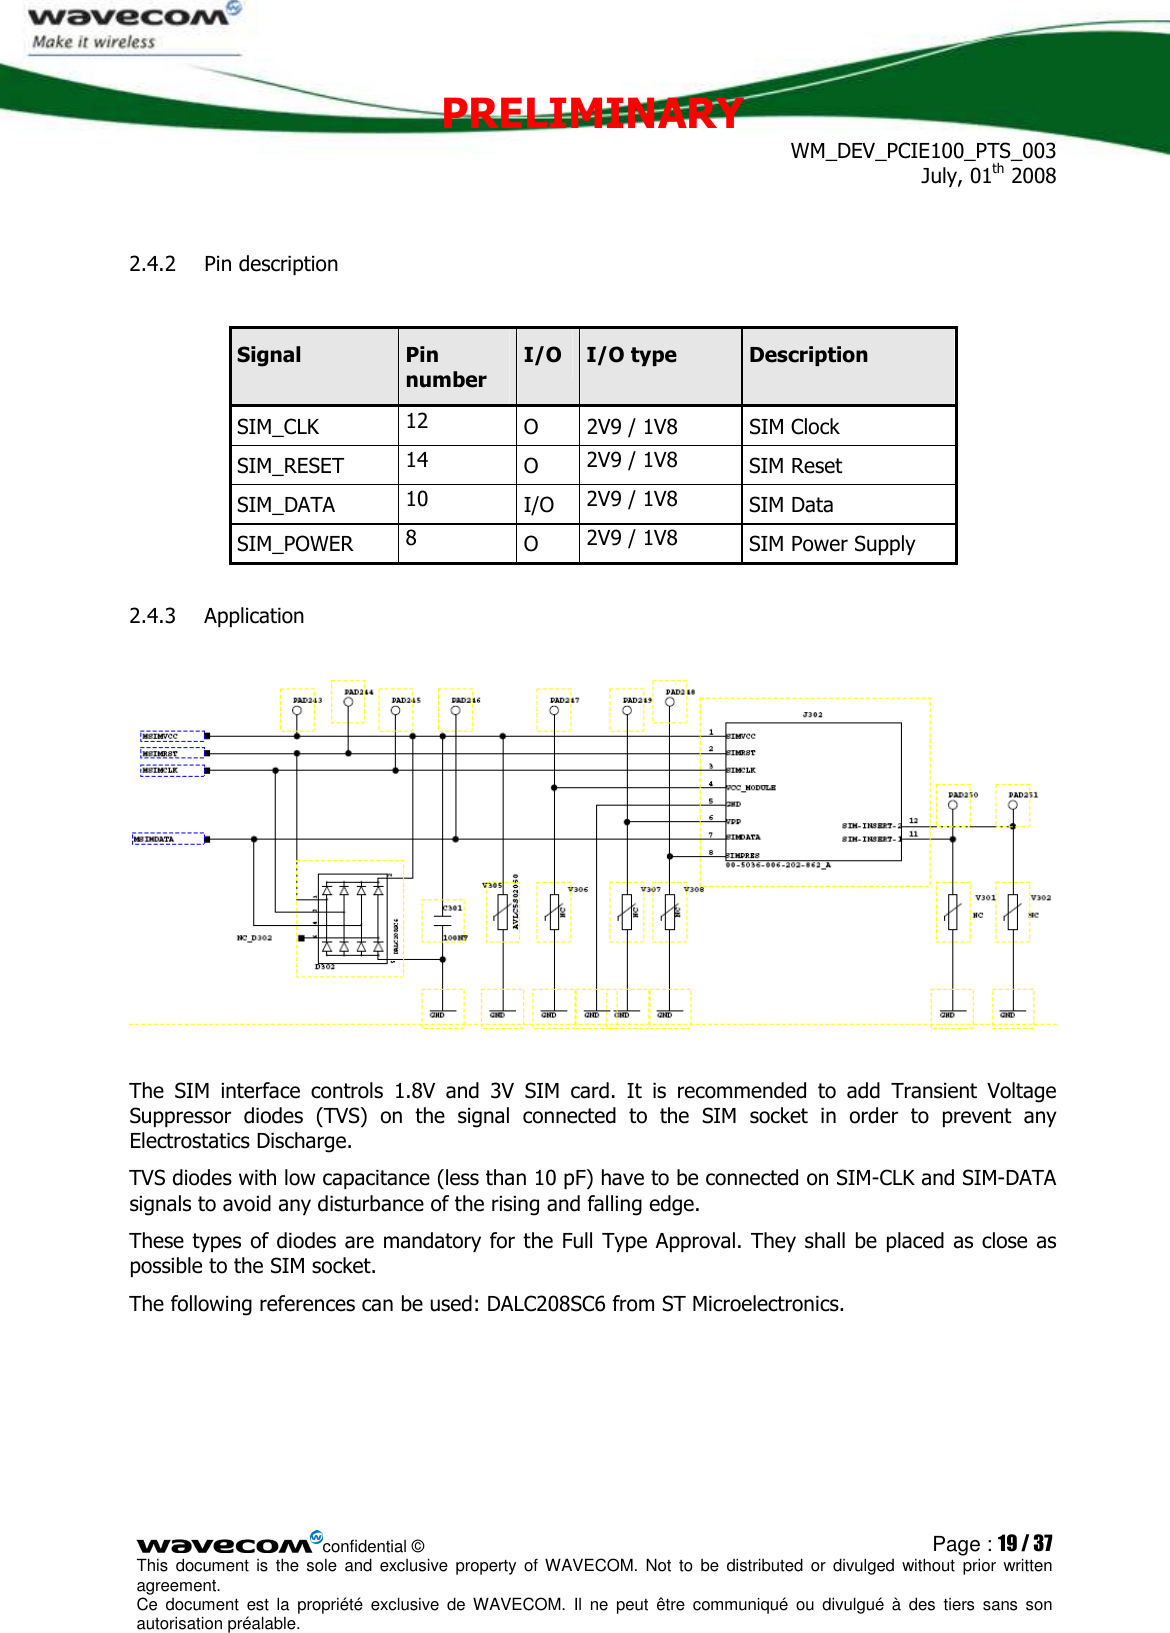 PRELIMINARY WM_DEV_PCIE100_PTS_003 July, 01th 2008  confidential © Page : 19 / 37 This  document  is  the  sole  and  exclusive property  of  WAVECOM.  Not  to  be  distributed  or  divulged  without  prior written agreement.  Ce  document  est  la  propriété  exclusive  de  WAVECOM.  Il  ne  peut  être  communiqué  ou  divulgué à  des  tiers  sans  son autorisation préalable.  2.4.2 Pin description  Signal  Pin number I/O  I/O type  Description SIM_CLK  12  O  2V9 / 1V8  SIM Clock SIM_RESET  14  O  2V9 / 1V8  SIM Reset SIM_DATA  10  I/O  2V9 / 1V8  SIM Data SIM_POWER  8  O  2V9 / 1V8  SIM Power Supply 2.4.3 Application    The  SIM  interface  controls  1.8V  and  3V  SIM  card.  It  is  recommended  to  add  Transient  Voltage Suppressor  diodes  (TVS)  on  the  signal  connected  to  the  SIM  socket  in  order  to  prevent  any Electrostatics Discharge. TVS diodes with low capacitance (less than 10 pF) have to be connected on SIM-CLK and SIM-DATA signals to avoid any disturbance of the rising and falling edge. These types  of diodes are mandatory for the Full Type Approval. They shall be placed as close as possible to the SIM socket. The following references can be used: DALC208SC6 from ST Microelectronics.  